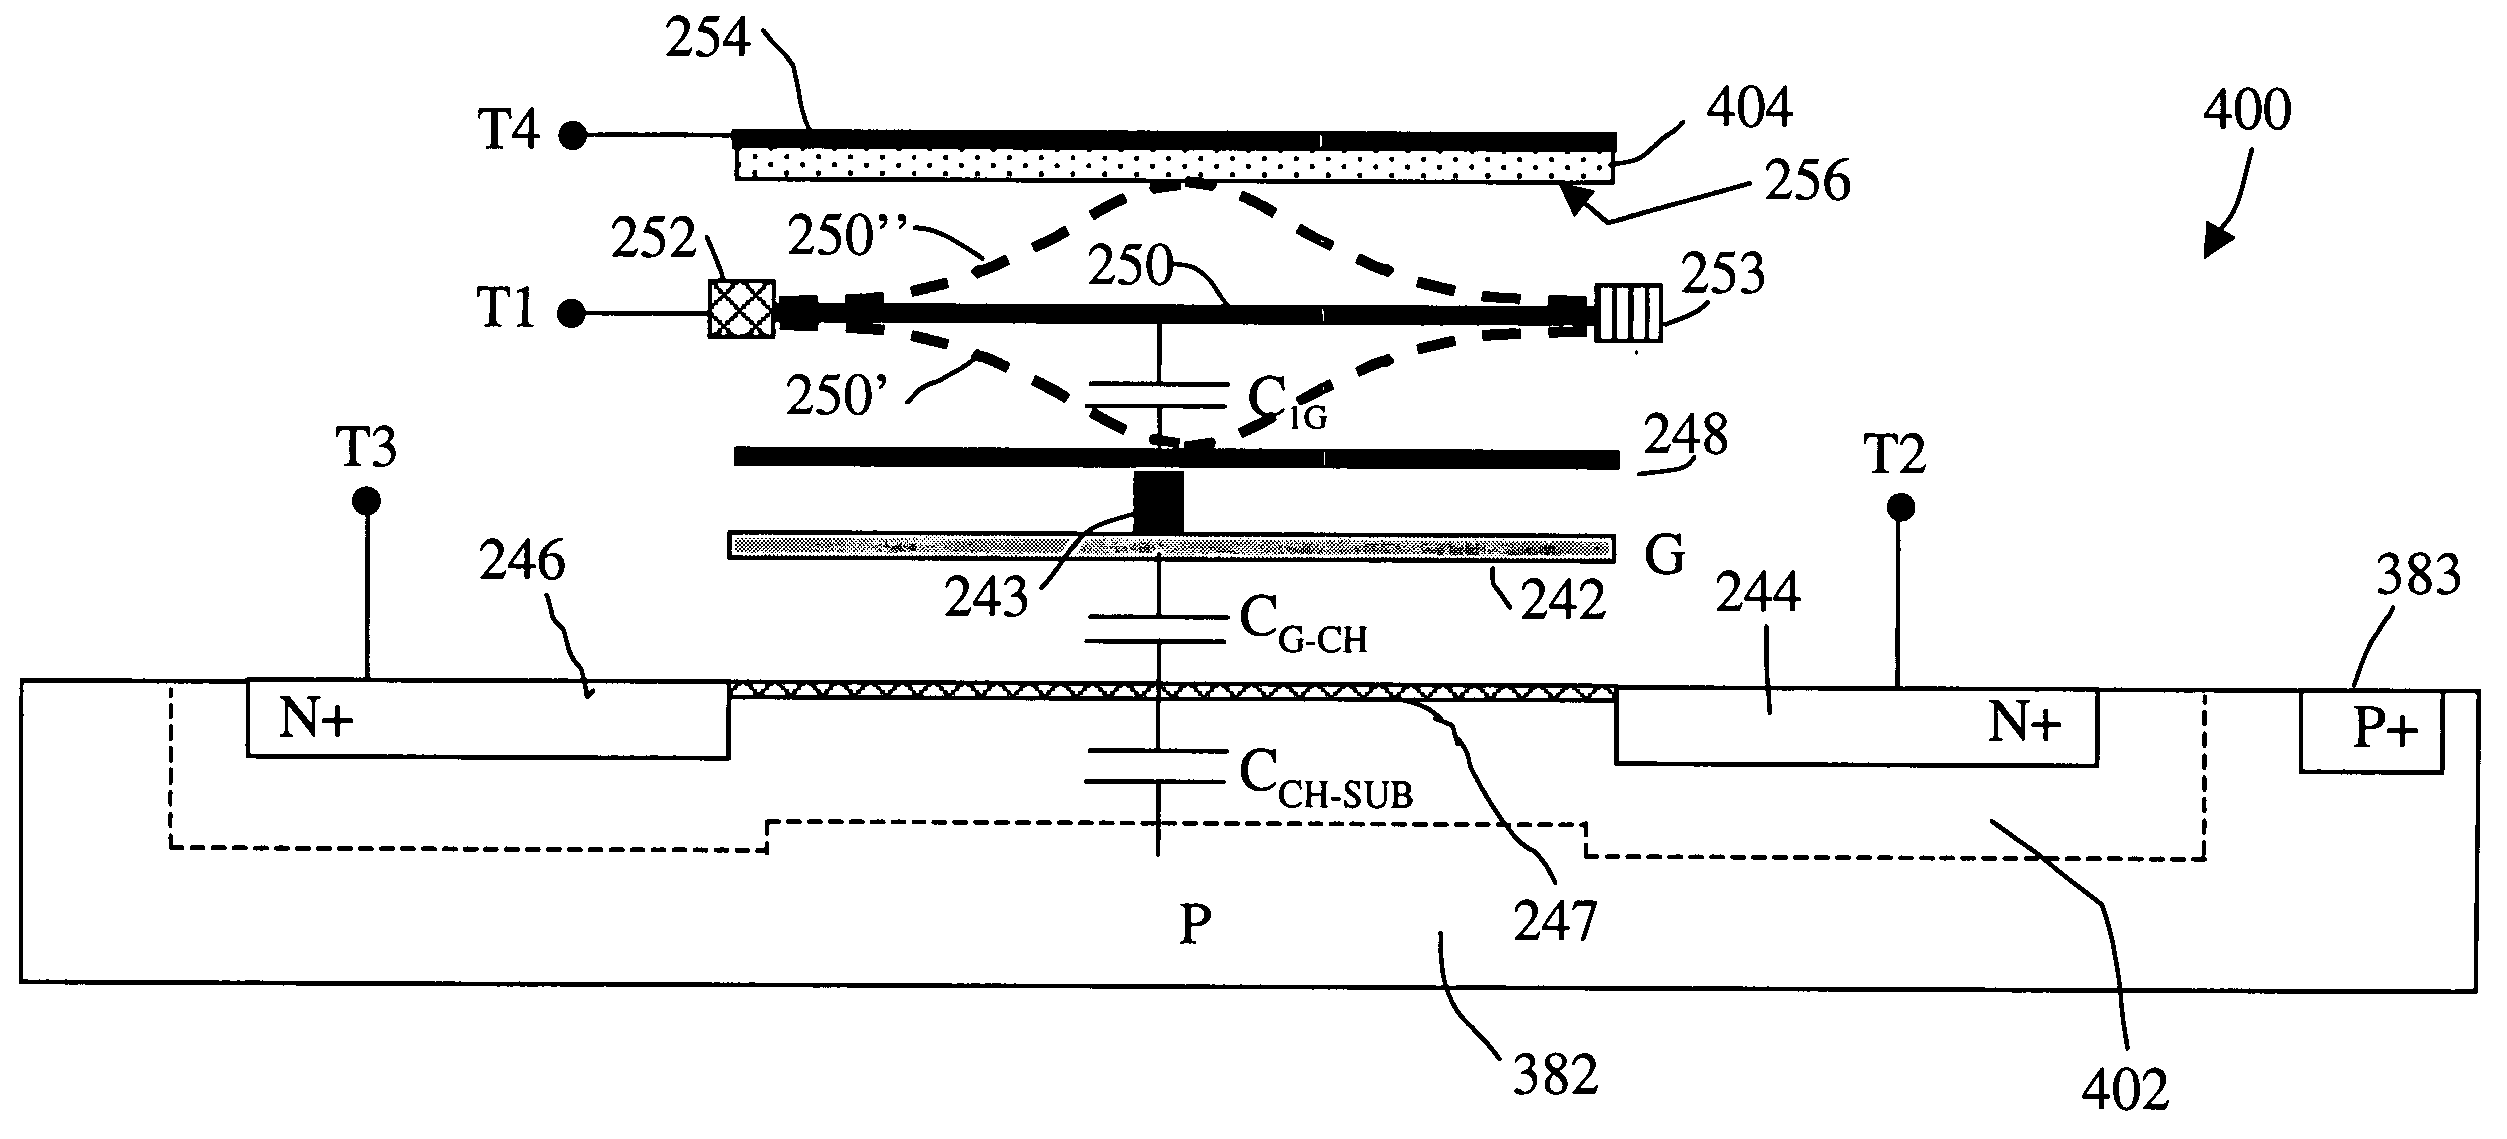 Field effect devices having a drain controlled via a nanotube switching element